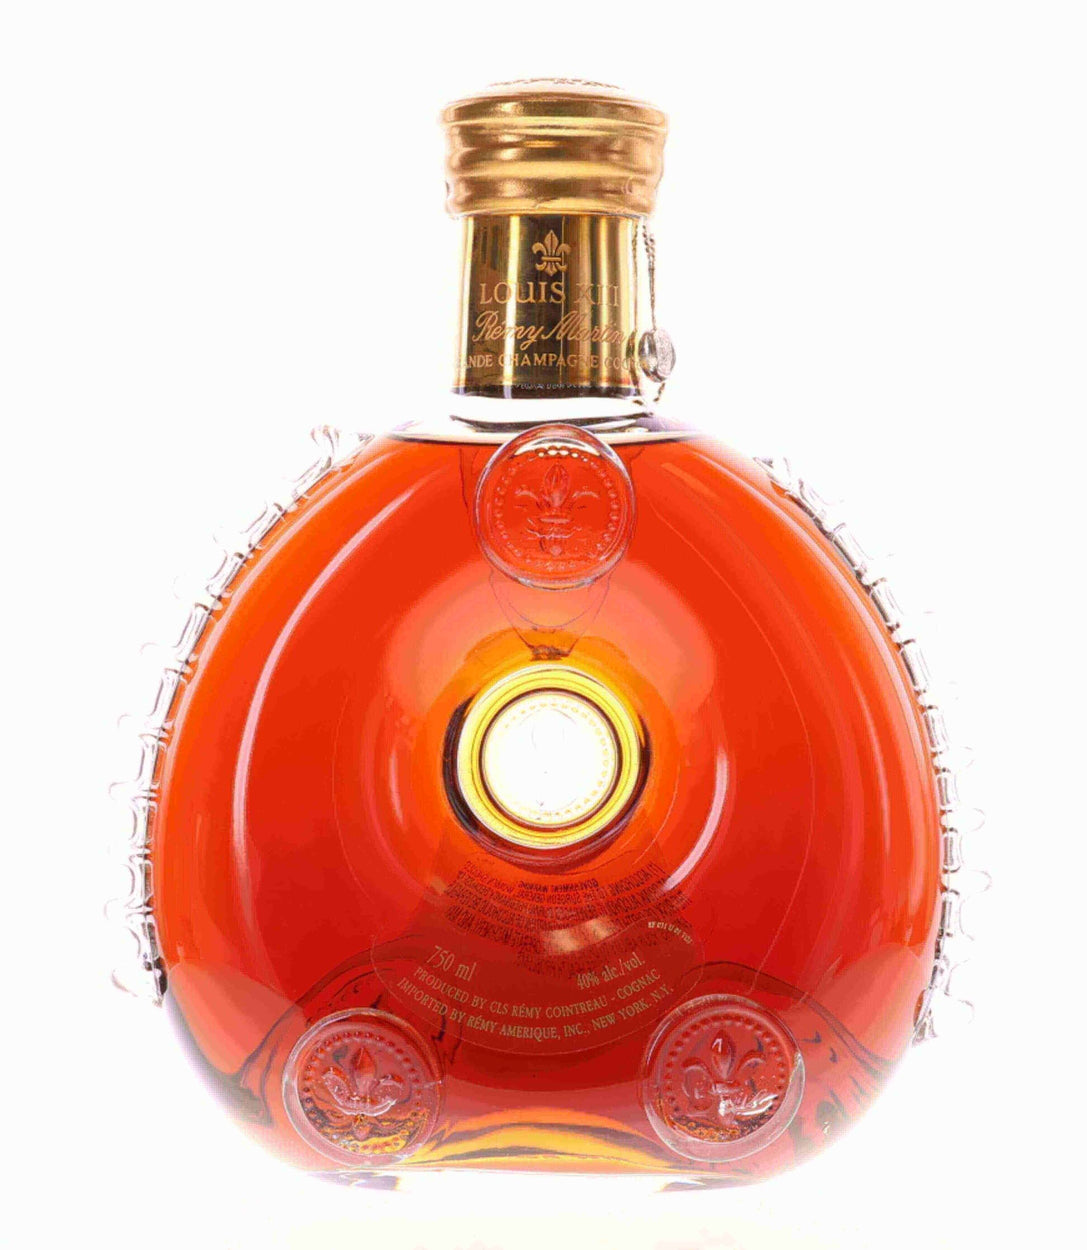 Louis XIII Cognac Red Clamshell Box